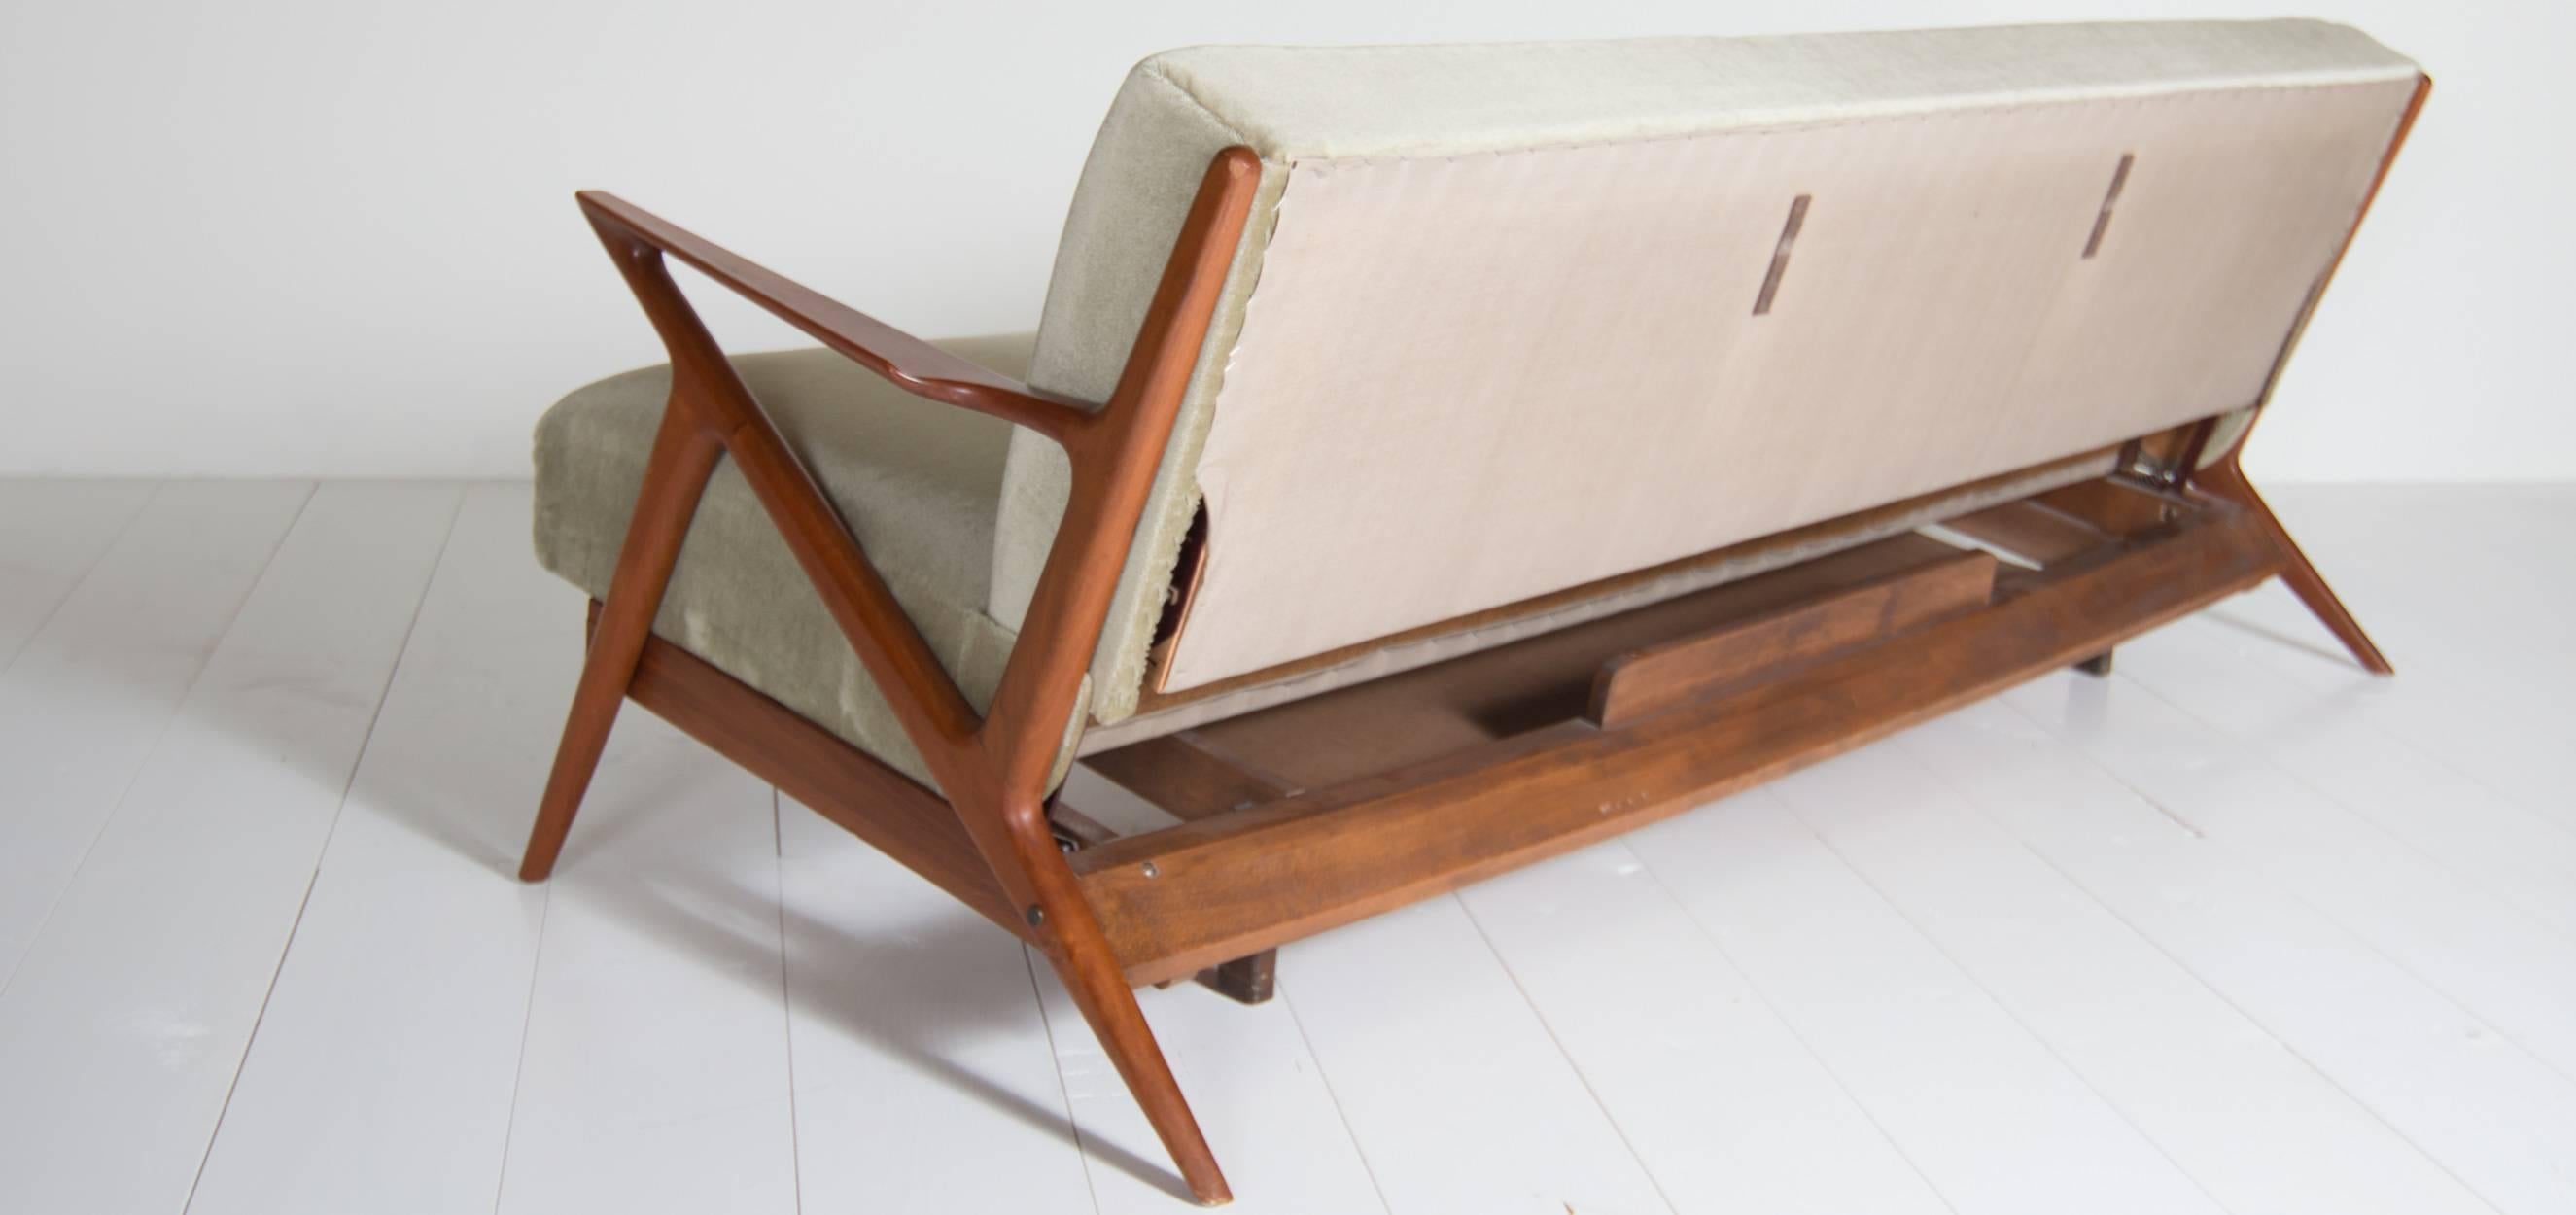 This Danish design vintage Z sofa is designed by Poul Jensen for the Danish furniture company Selig OPE. The vintage Z sofa changes easily into a daybed because of the system in the frame. The frame is made from teak and the sofa is upholstered with